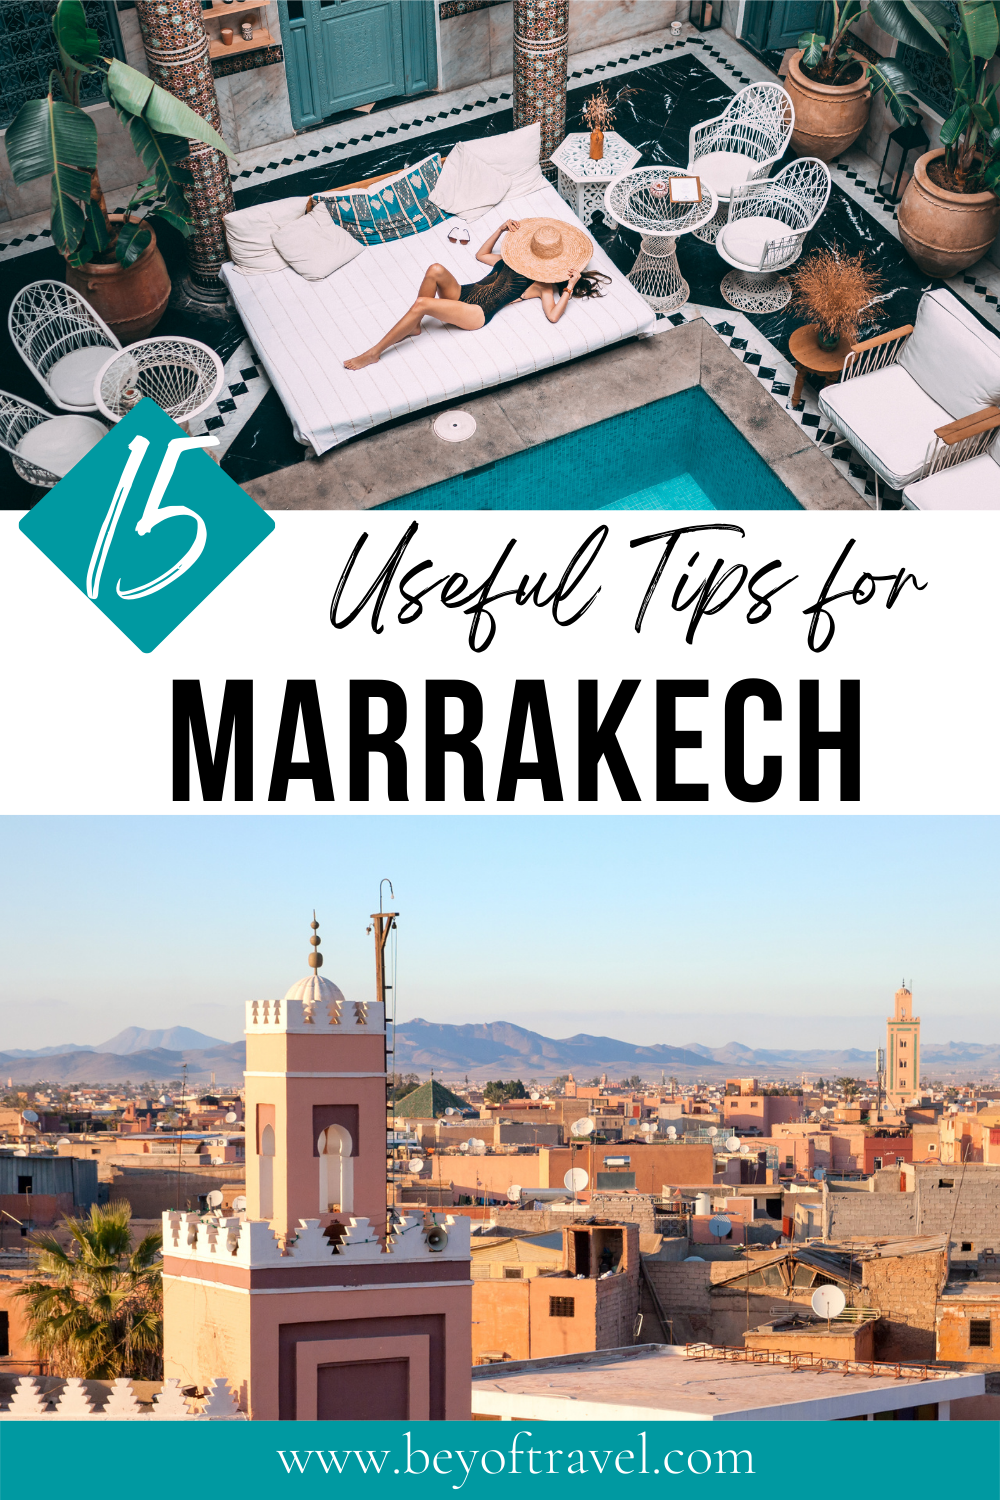 Useful tips for Marrakech